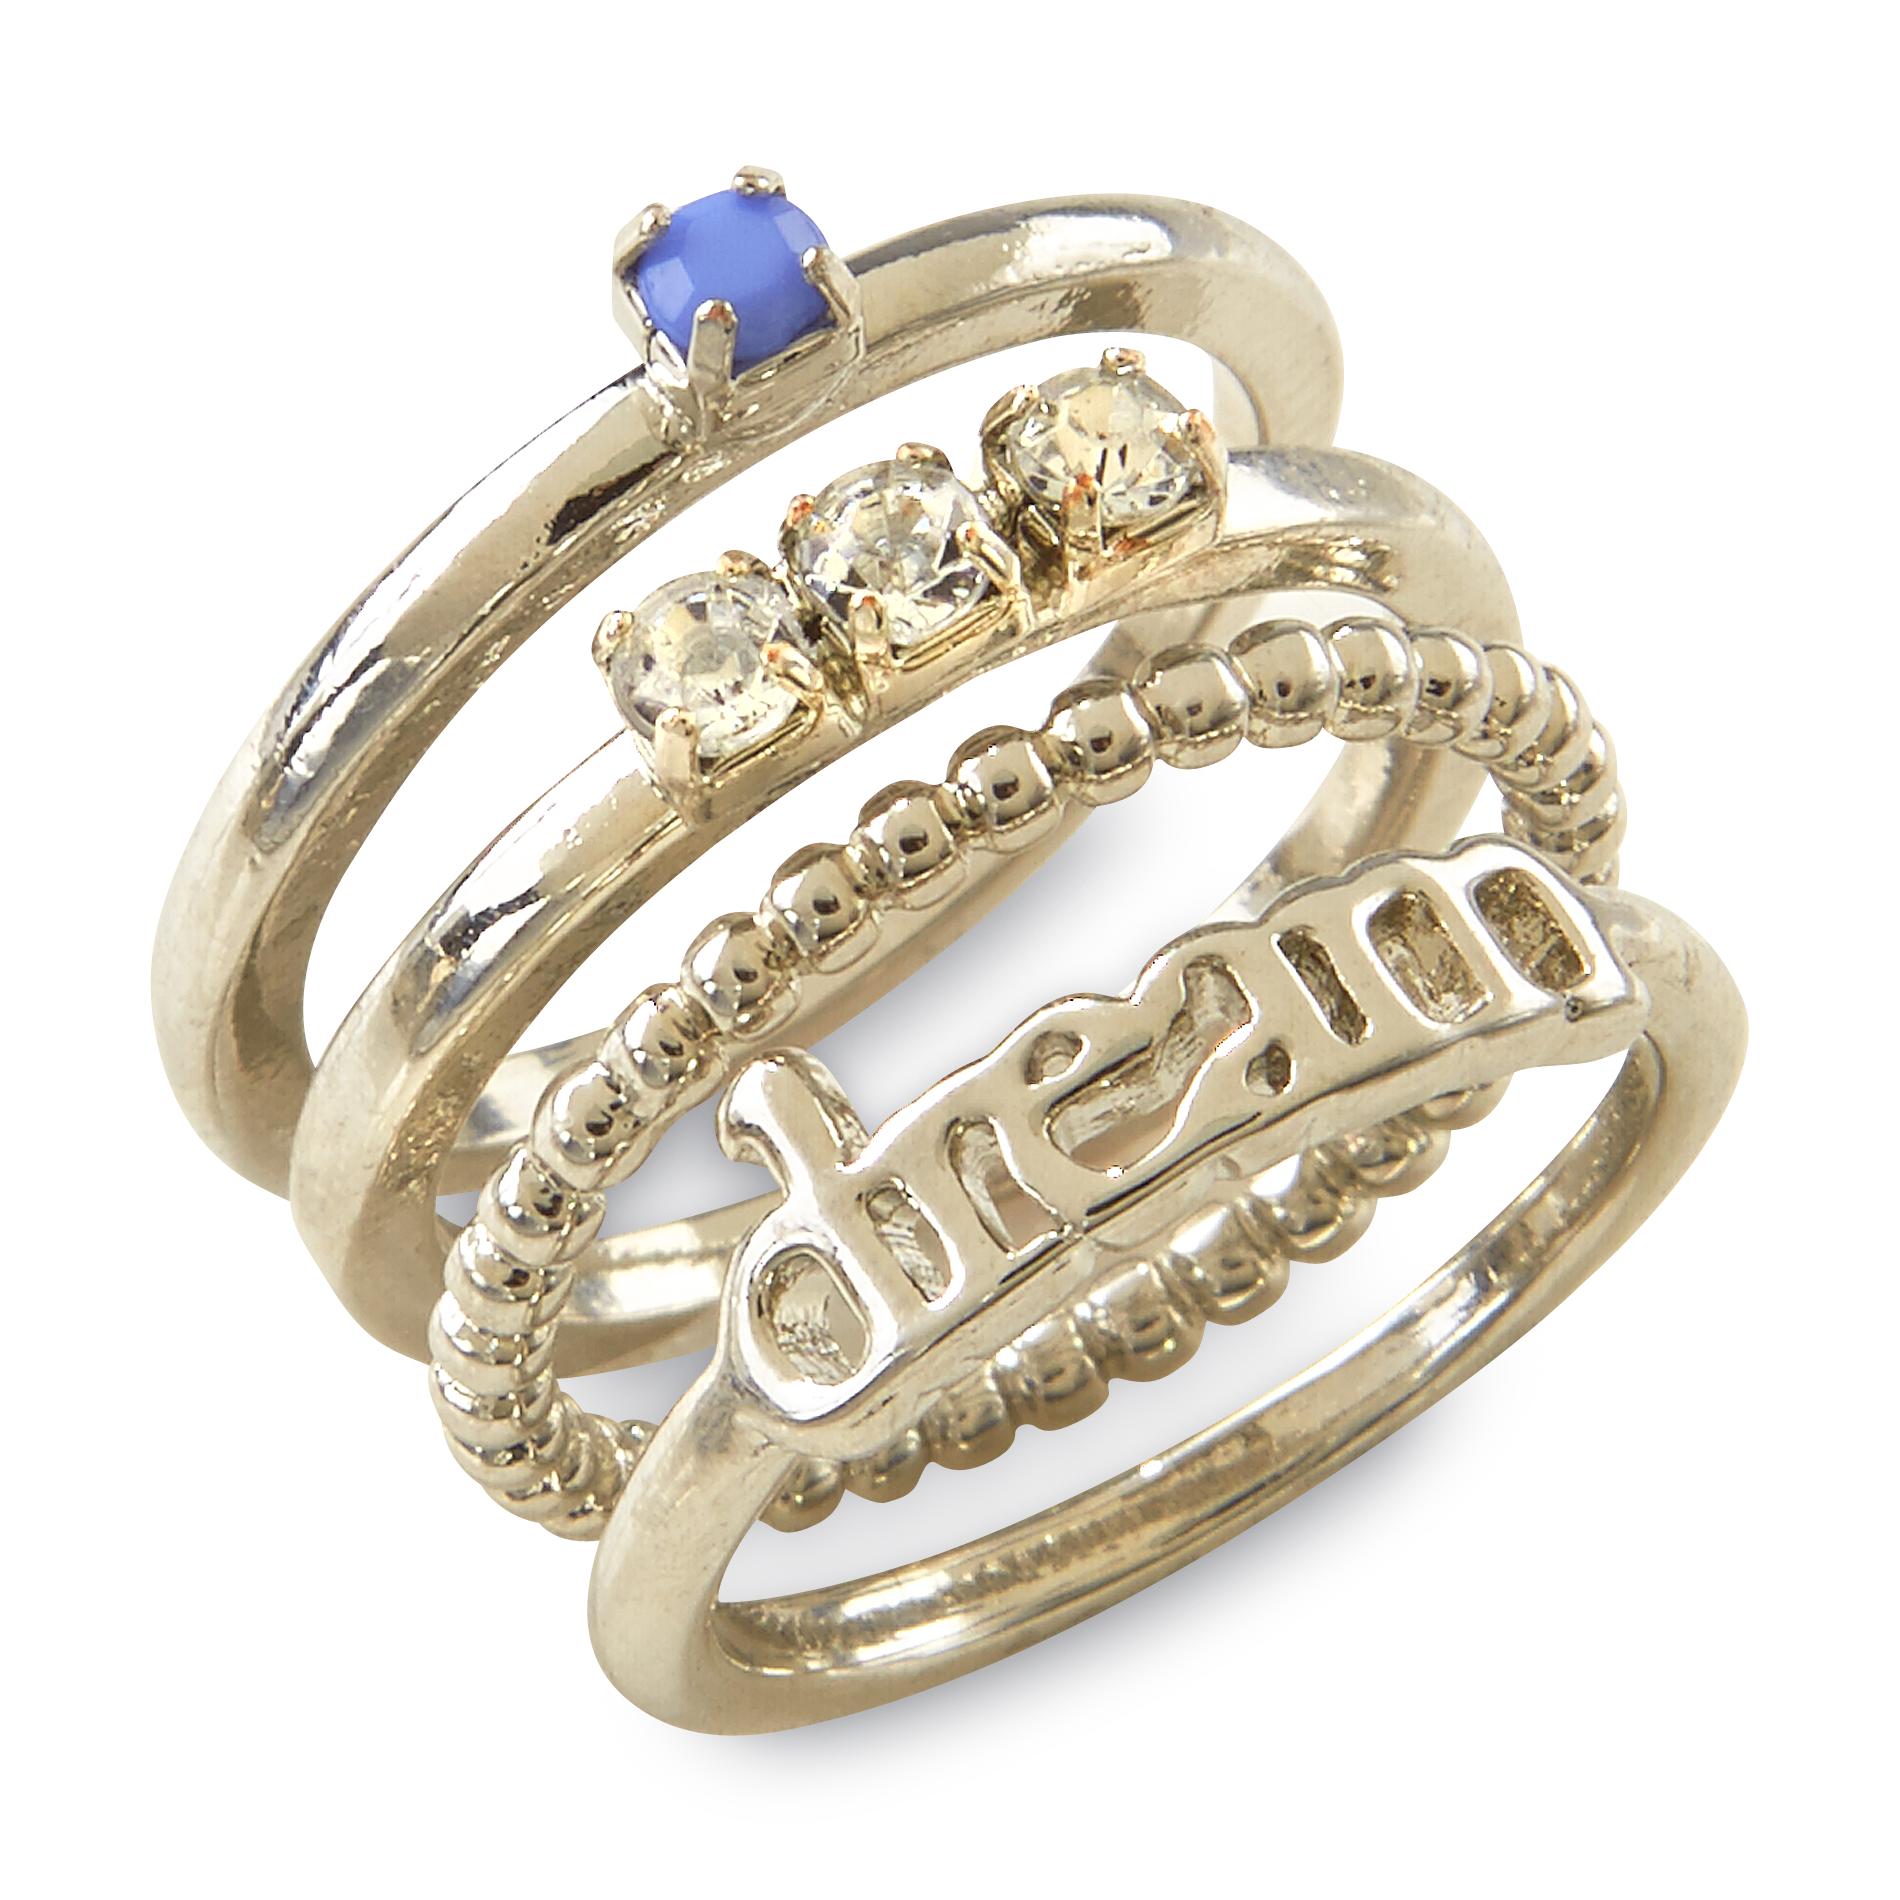 Junior's 4-Piece Polished Silvertone Stackable Rings - Dream